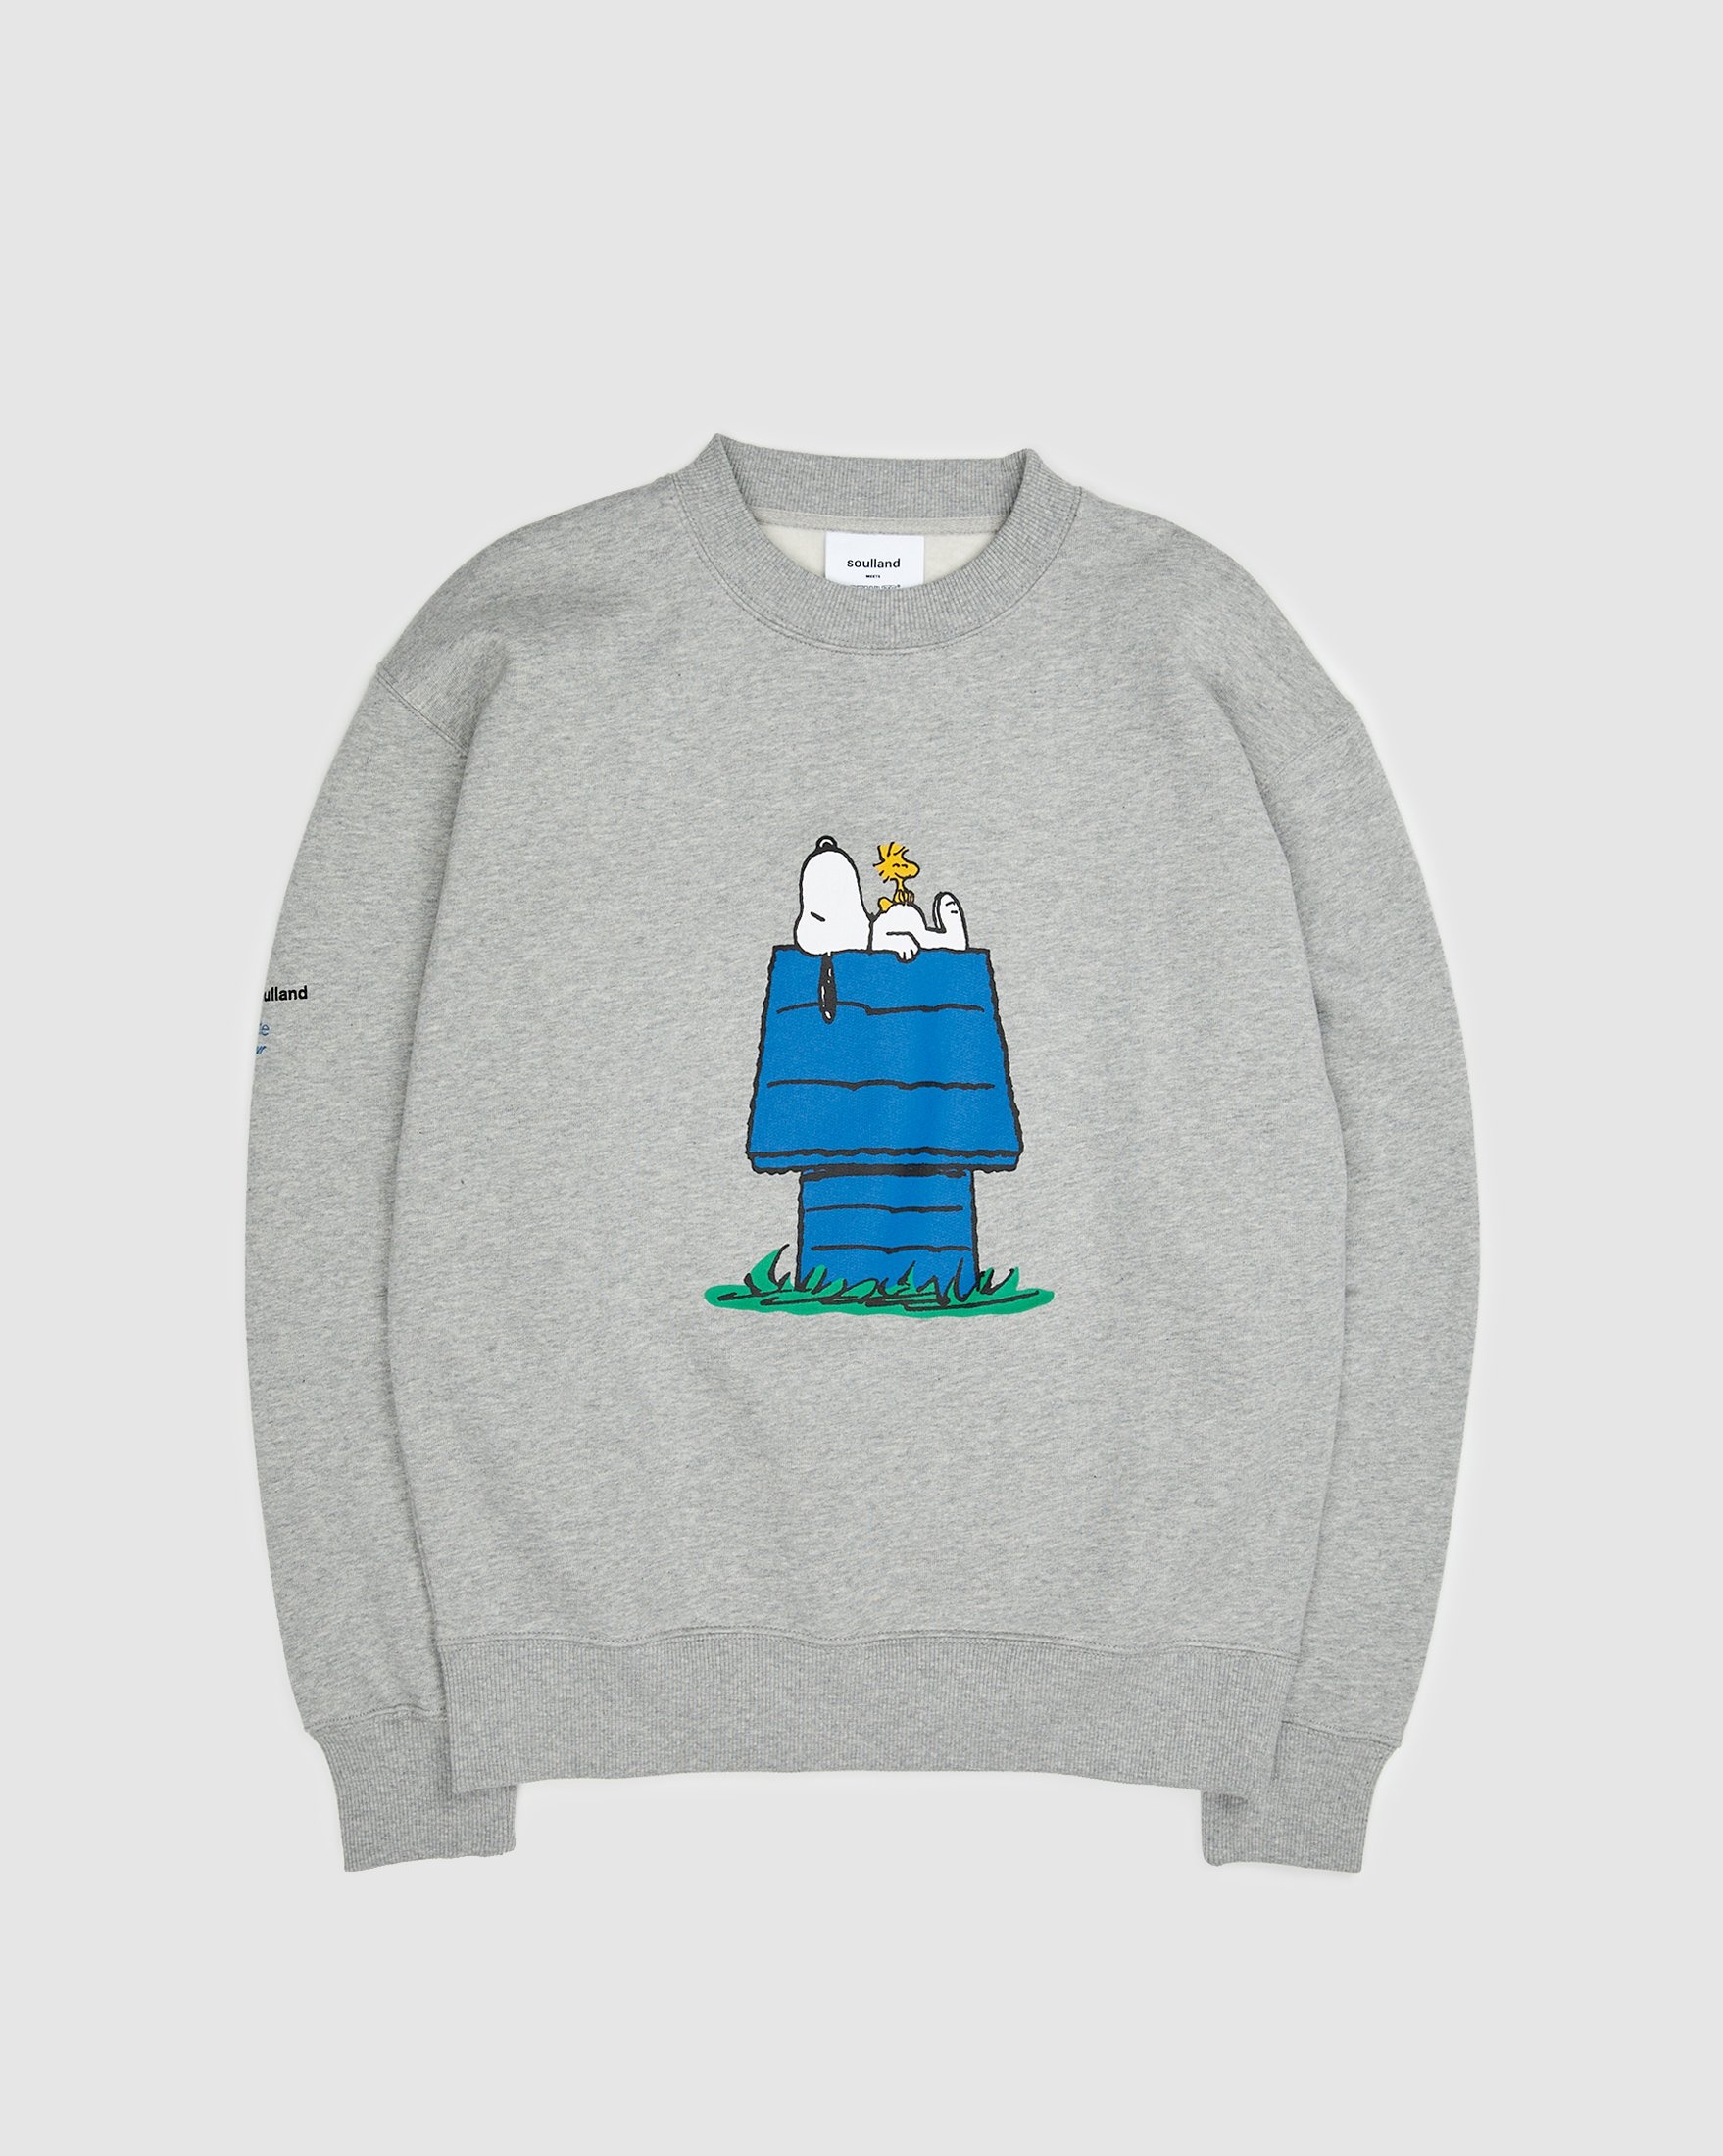 Colette Mon Amour x Soulland – Snoopy Bed Grey Crewneck - Sweats - Grey - Image 1